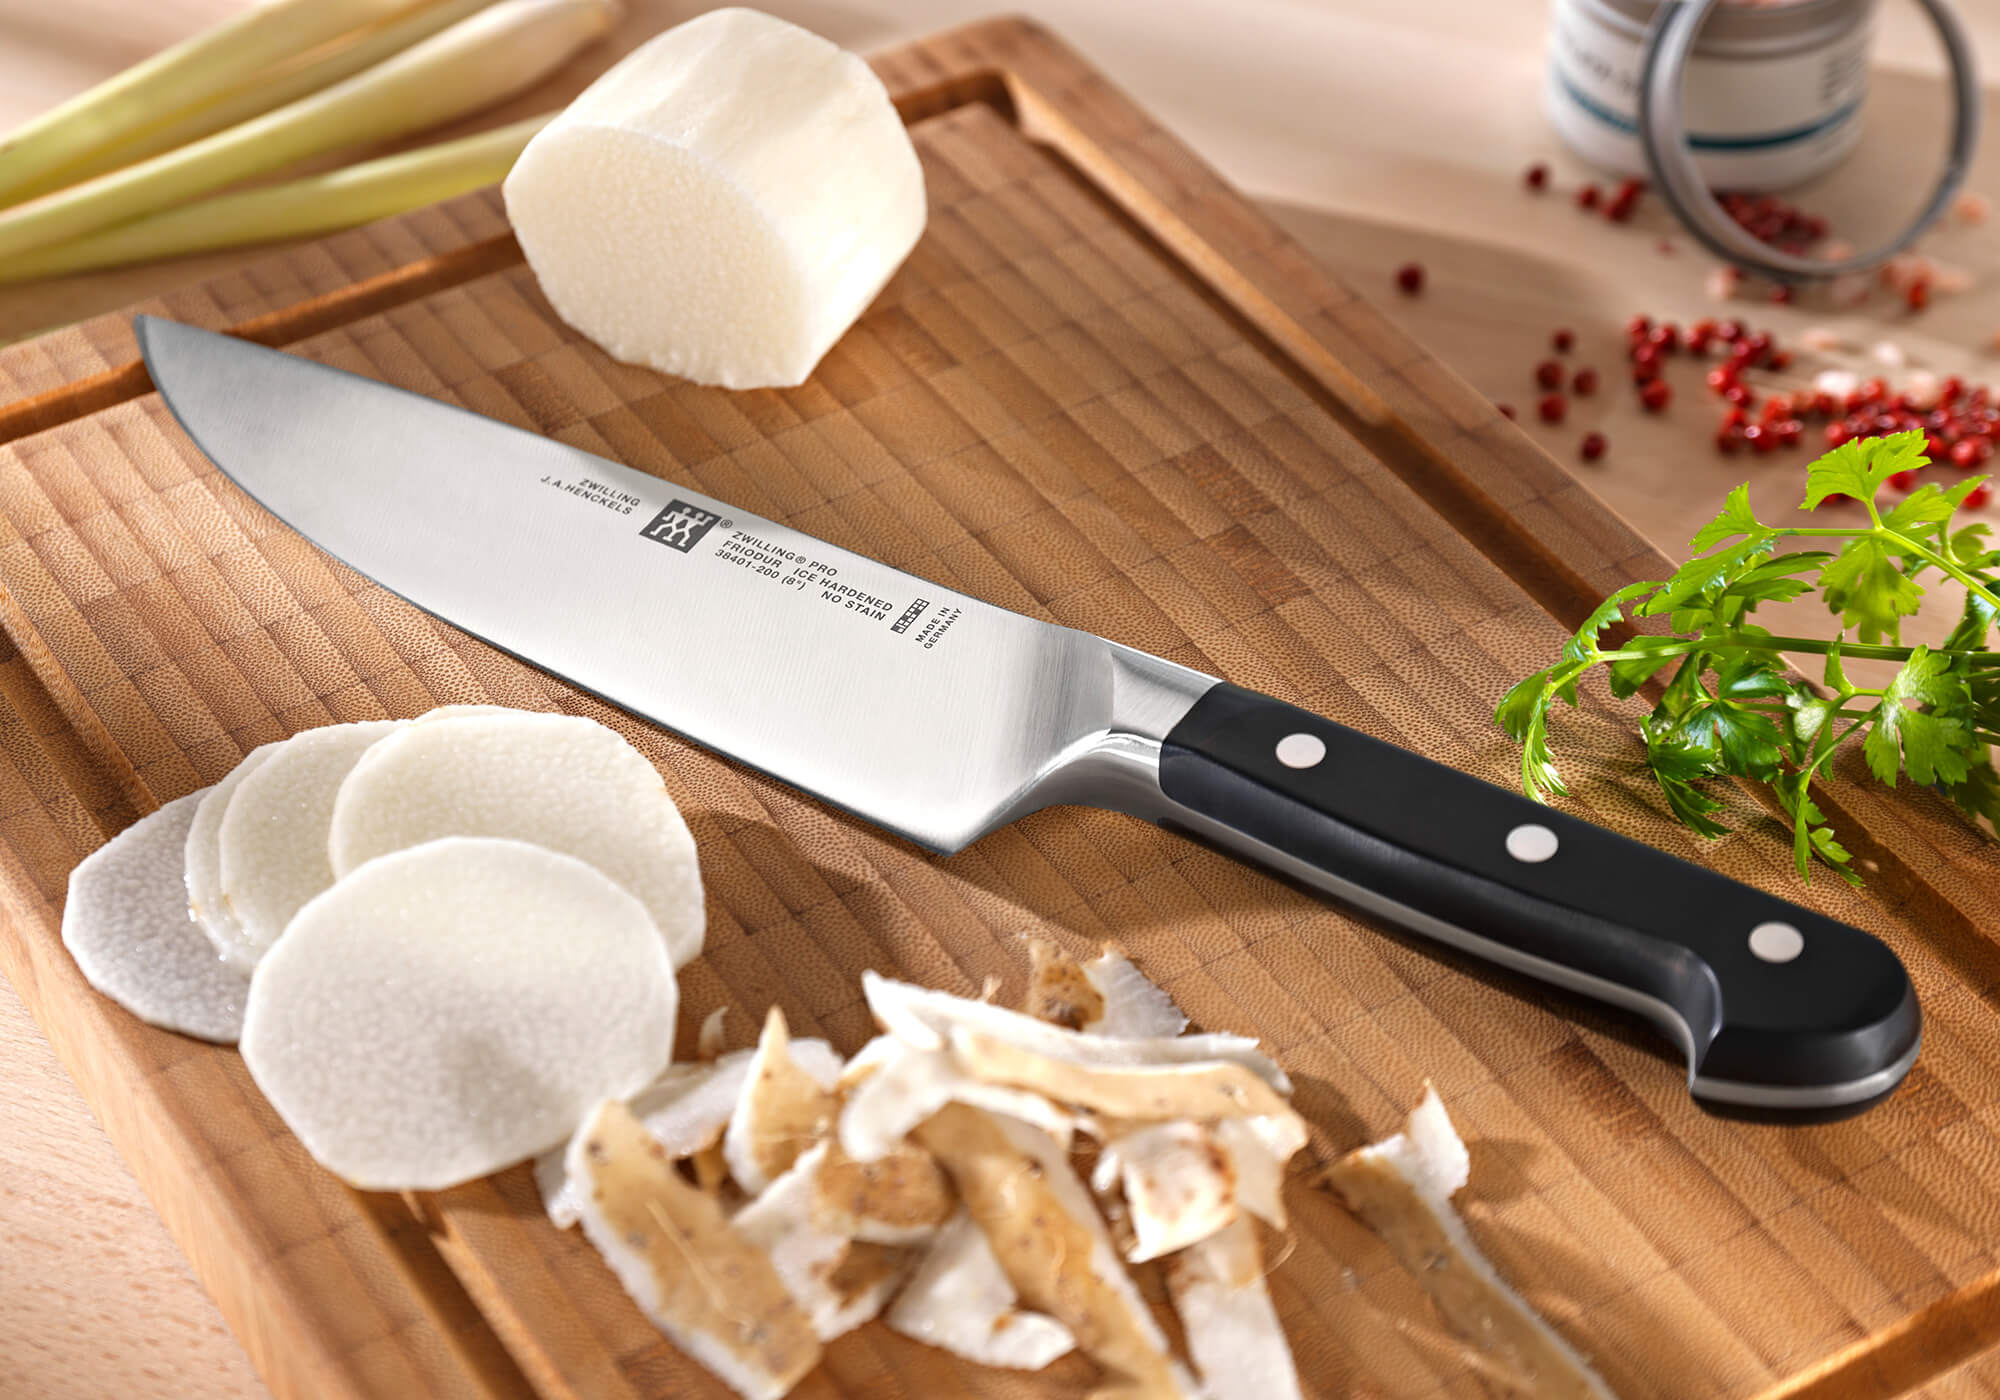 How to Care and Maintain for your Kitchen Knives